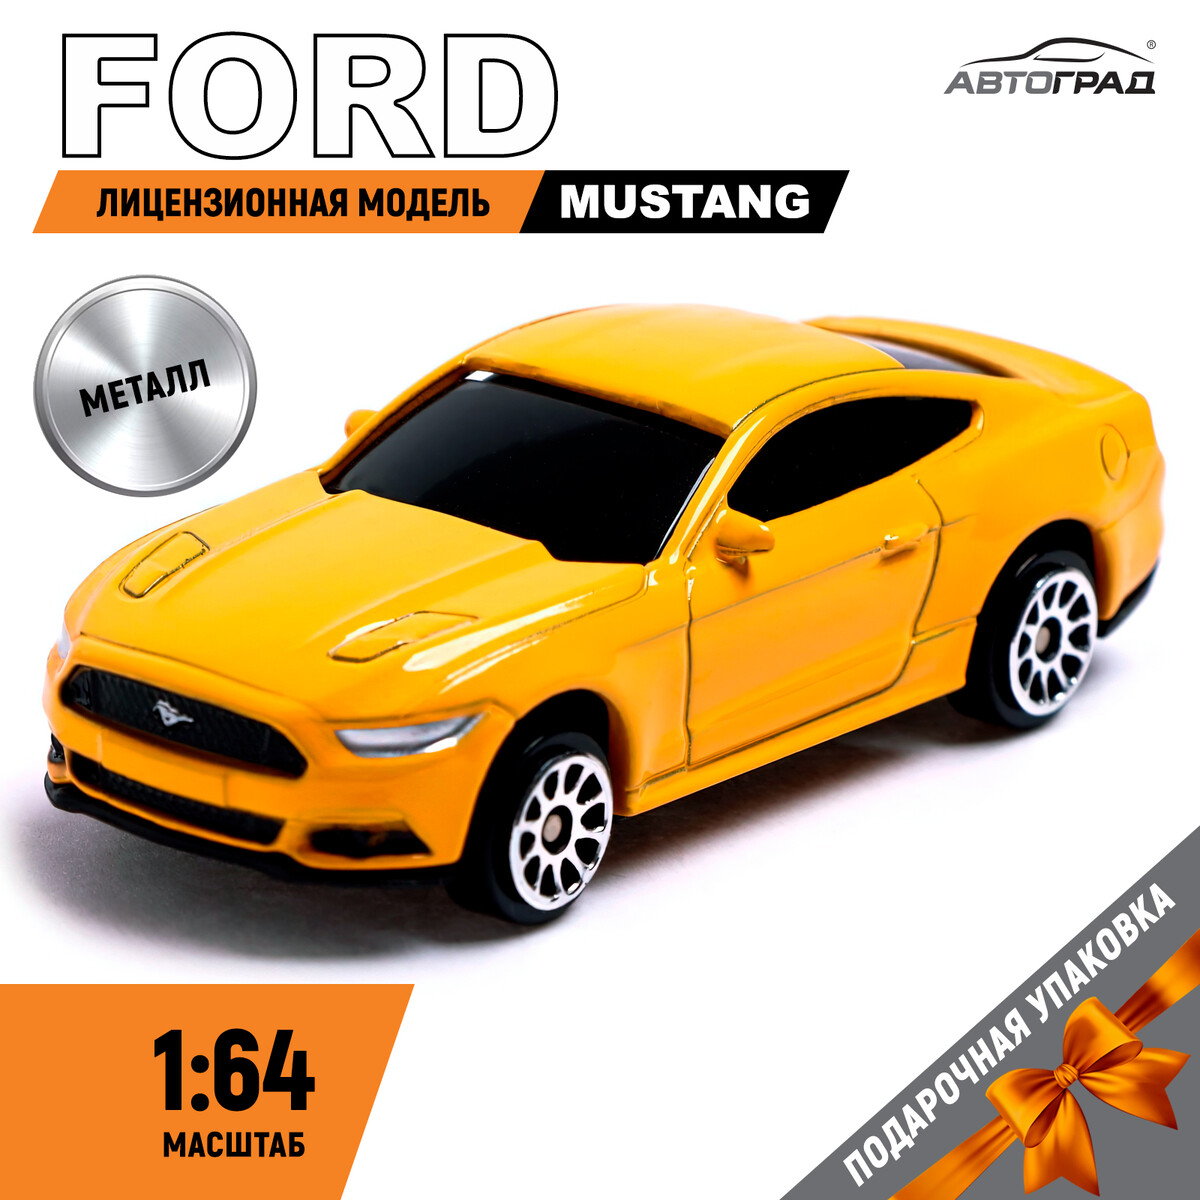 Машина металлическая ford mustang, 1:64, цвет желтый he xiang remote control car key for ford fusion explorer edge mustang 2013 2017 fccid m3n a2c31243300 fsk902 id49 promixity